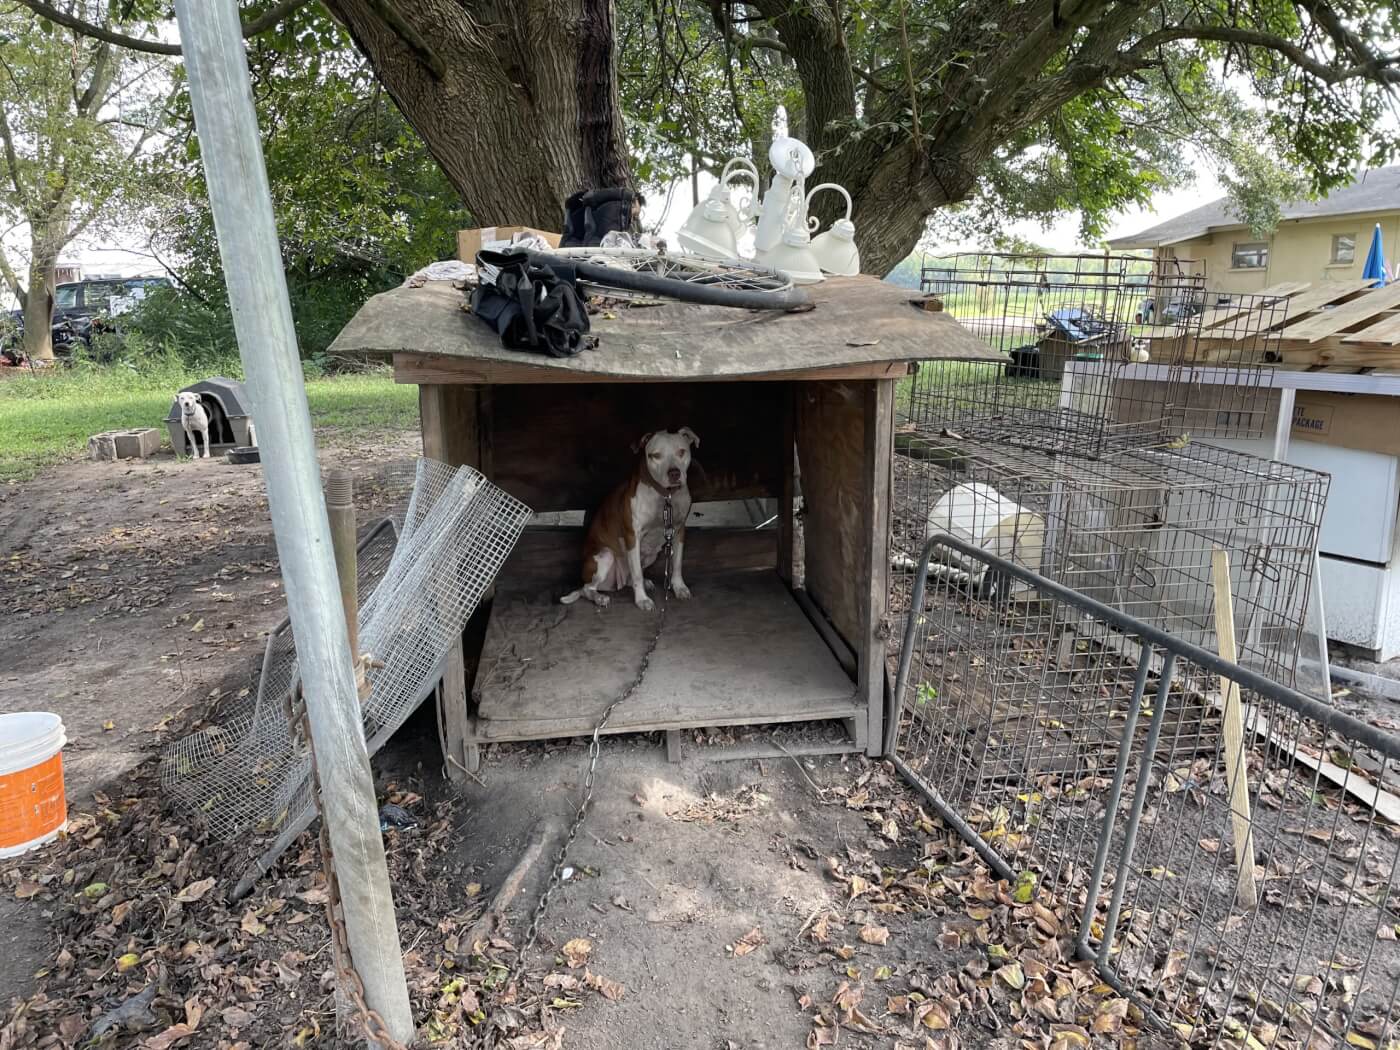 Bella, before. A dog, chained to a pole, inside a sagging doghouse built out of wooden palettes. Seemingly hazardous trash litters her walking radius from the outside pole.